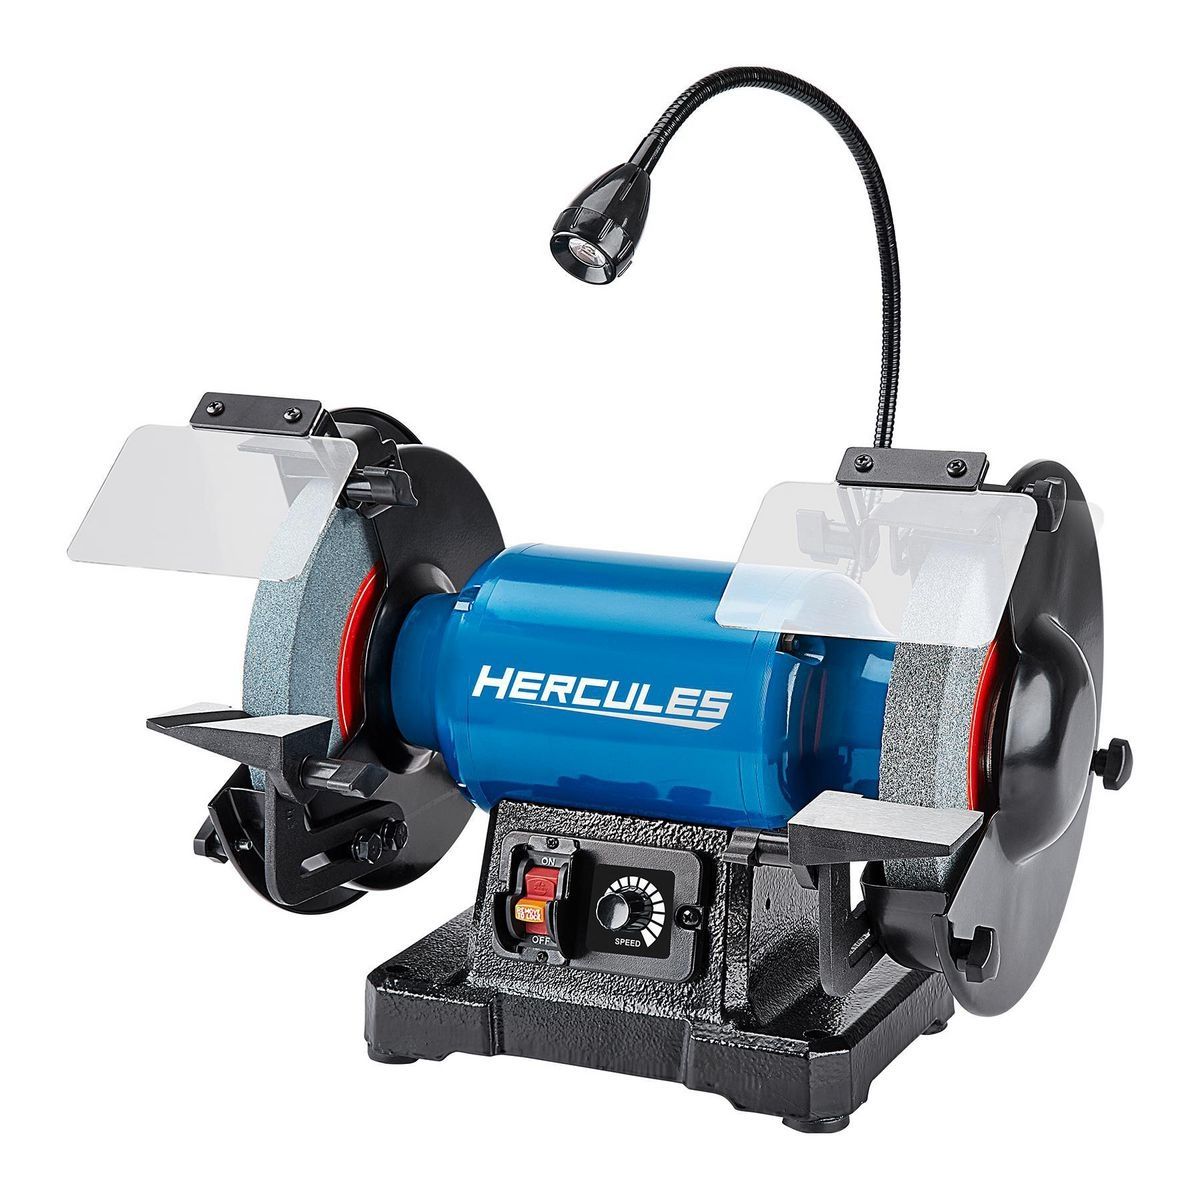 HERCULES 8 in. Variable Speed Bench Grinder with LED Work Light